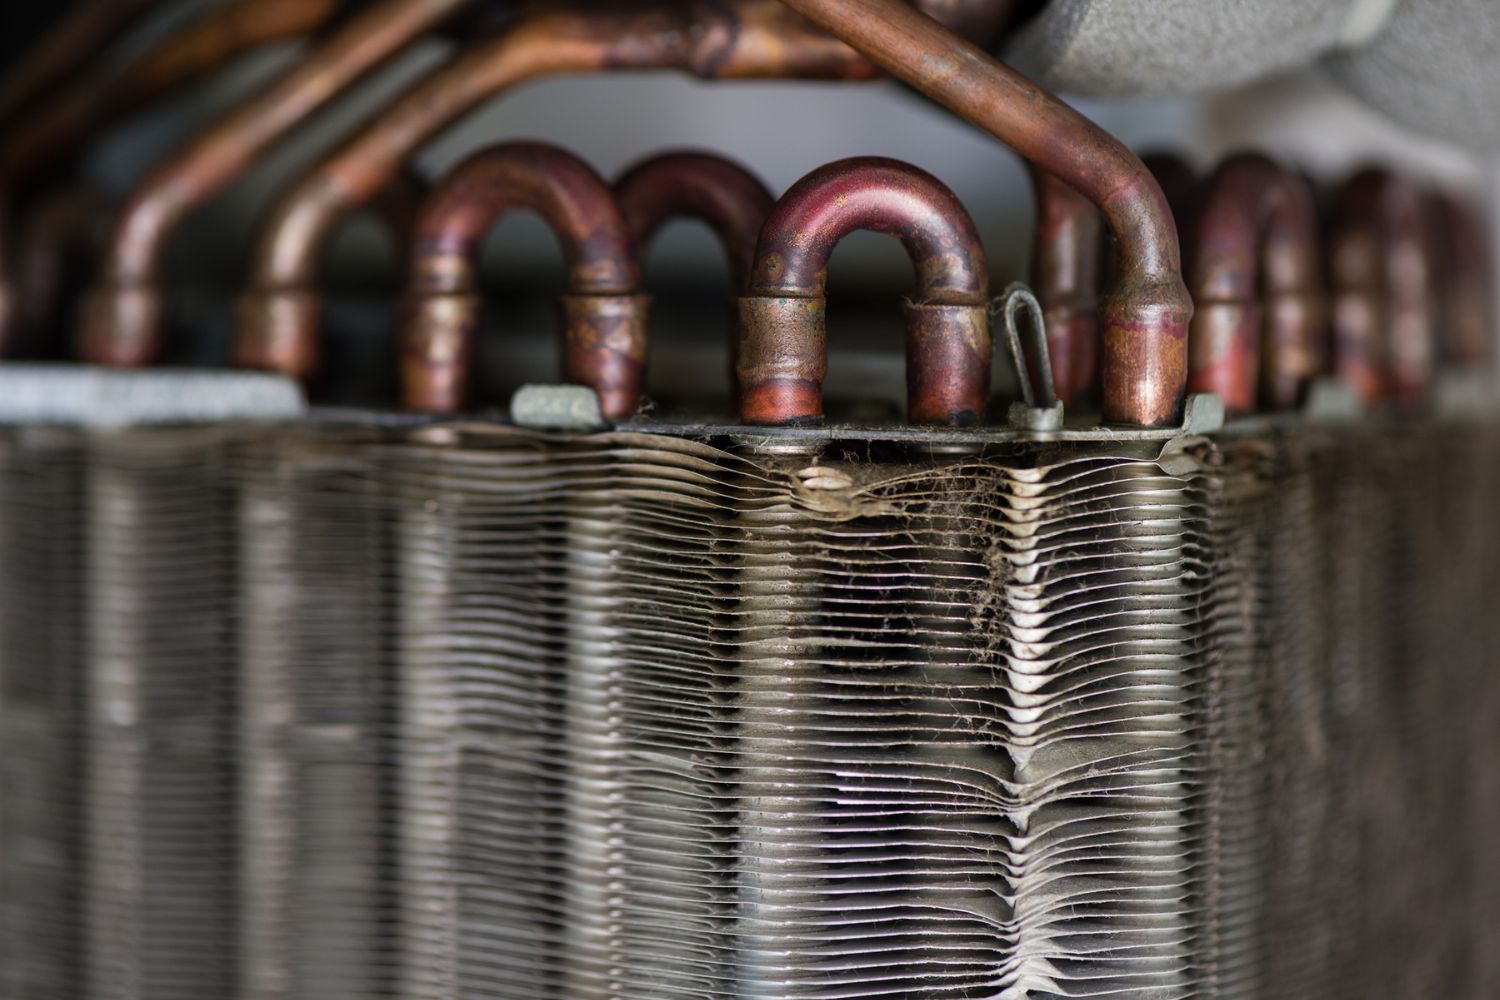 How Much Does AC Evaporator Coil Replacement Cost?